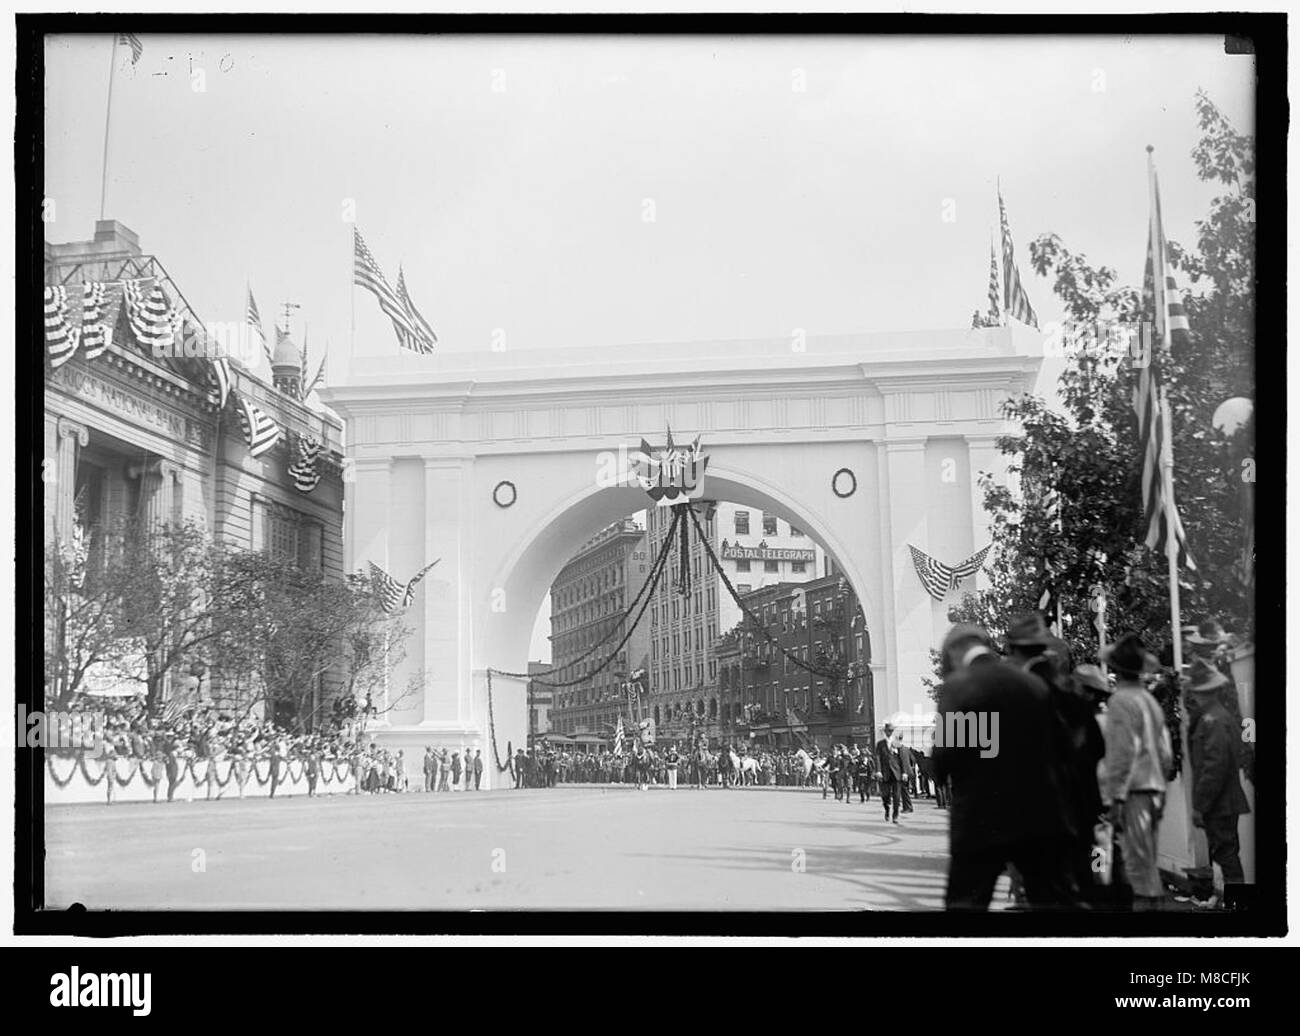 FIRST DIVISION, A.E.F. AMERICAN EXPEDITIONARY FORCES. MISCELLANEOUS VIEWS OF PARADE LCCN2016870471 Stock Photo